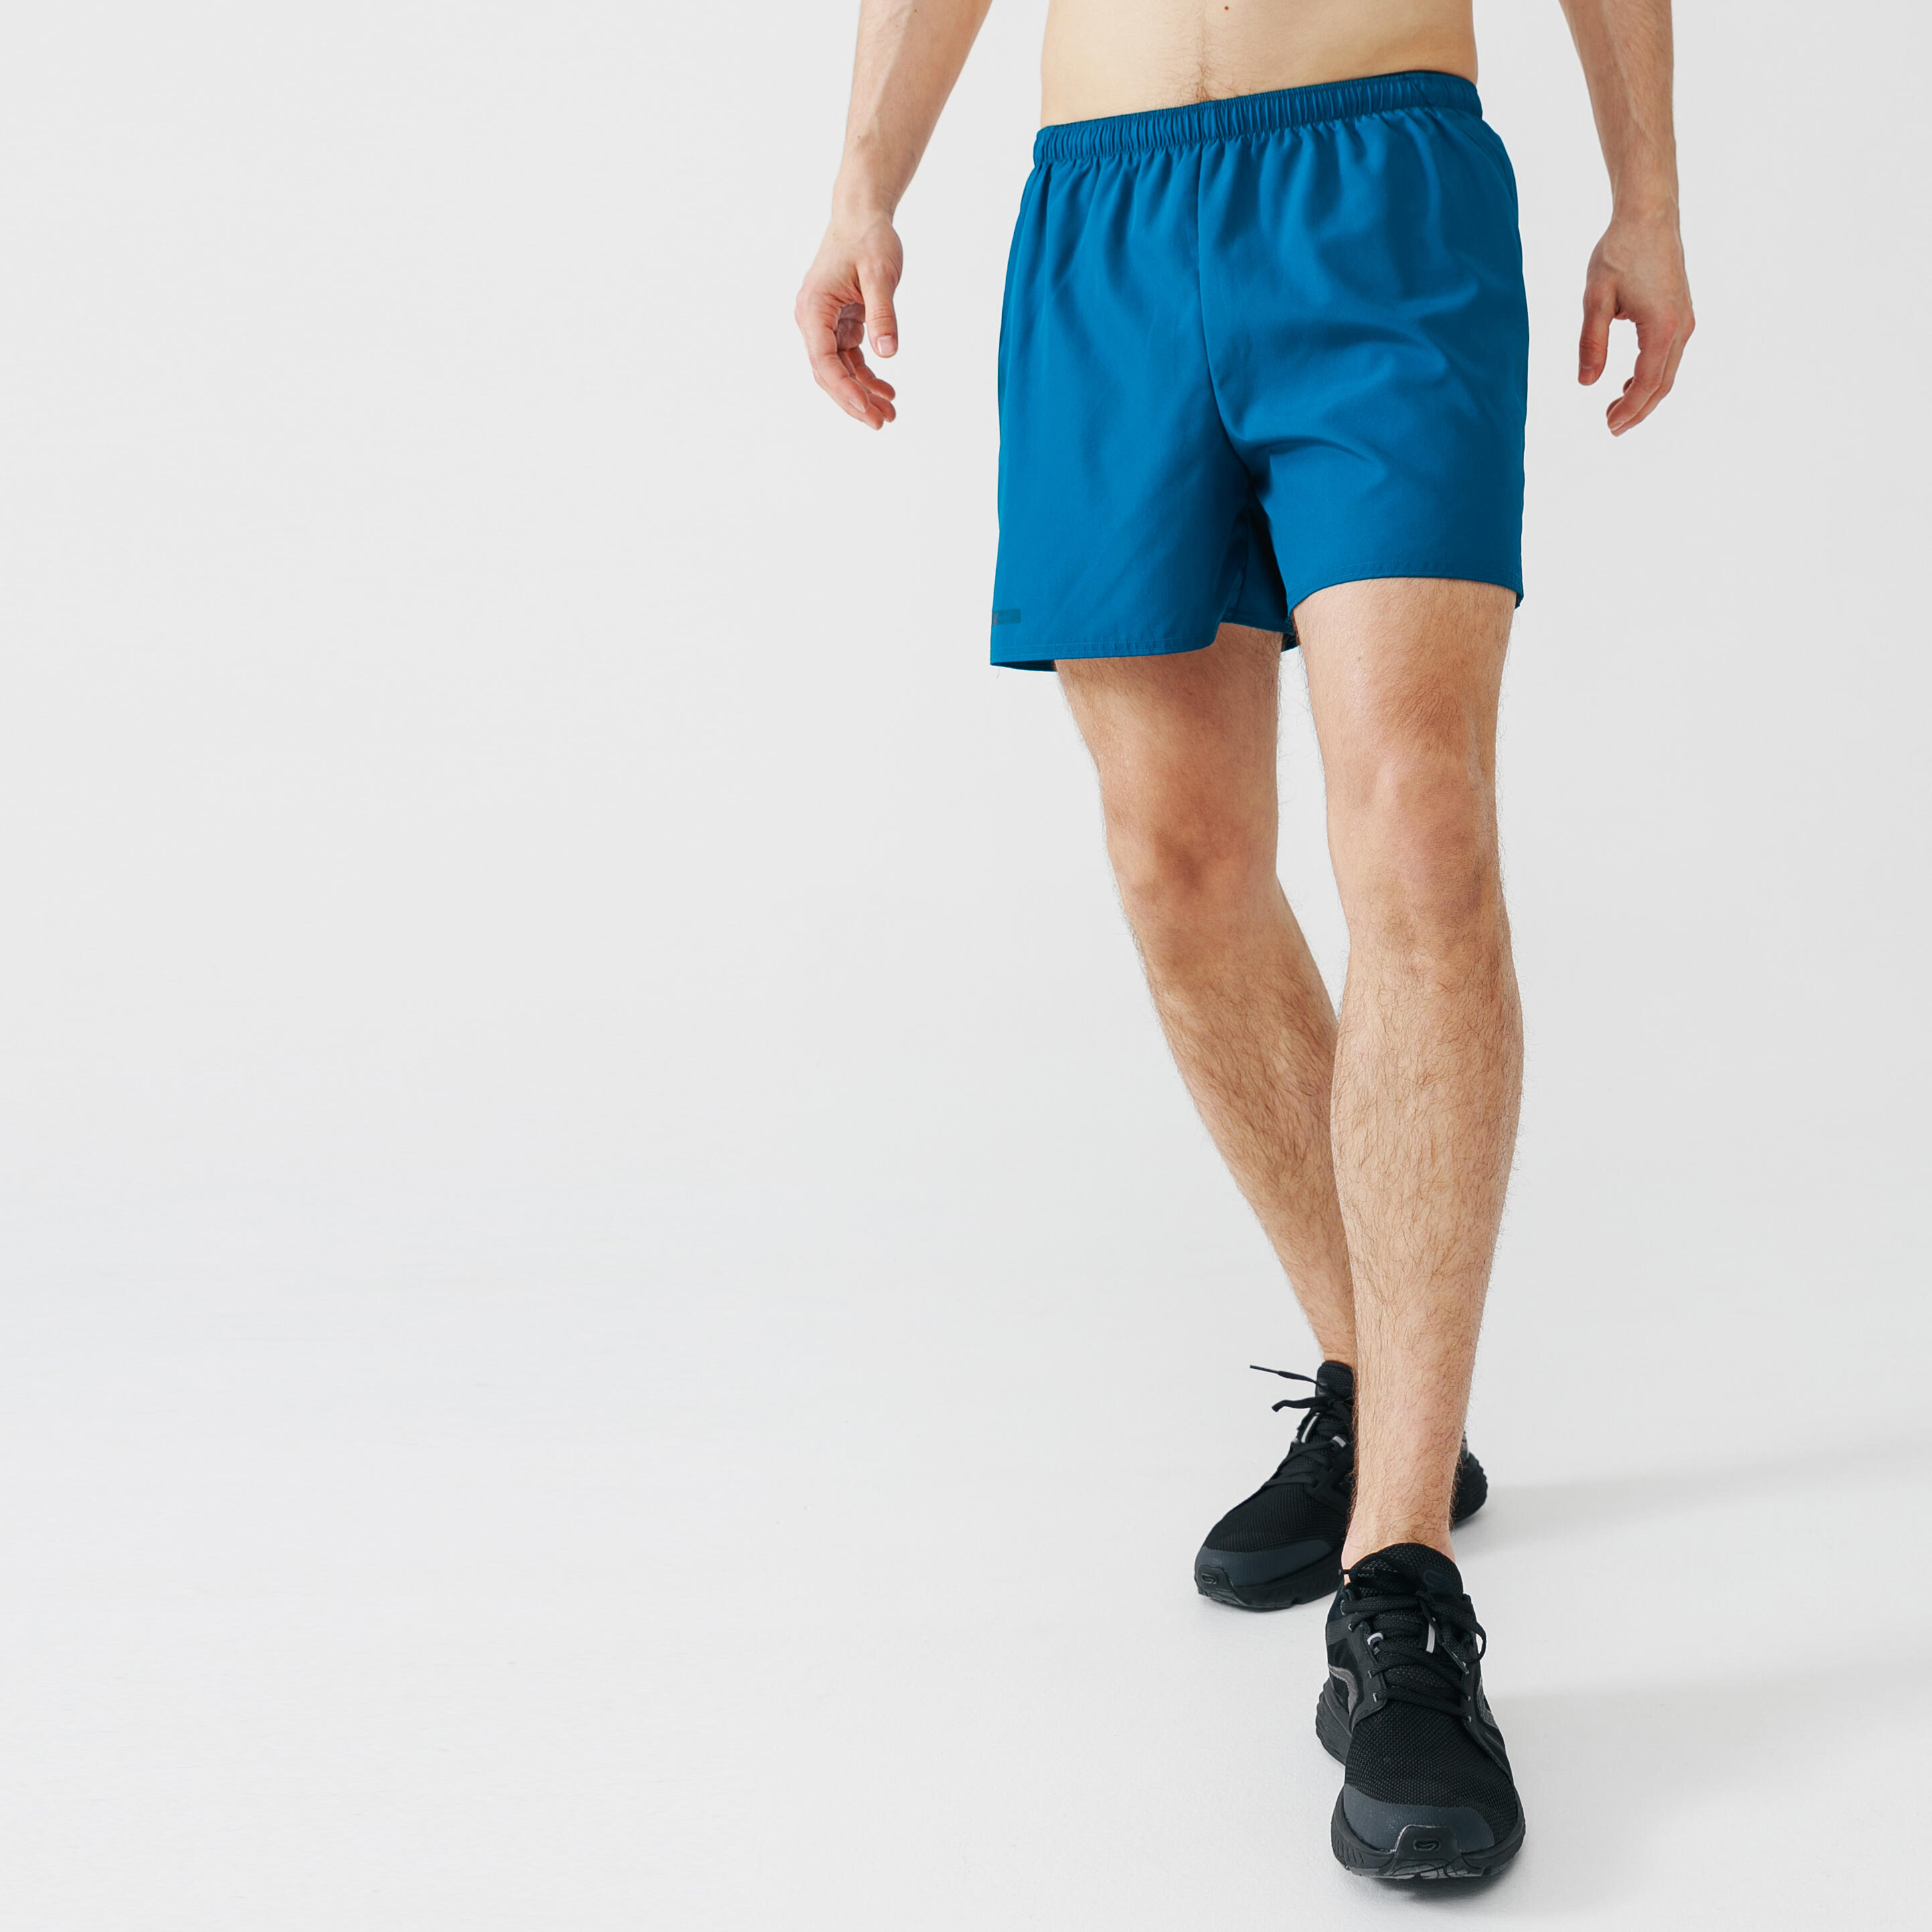 Men's Running Breathable Shorts Dry - Prussian blue 5/5